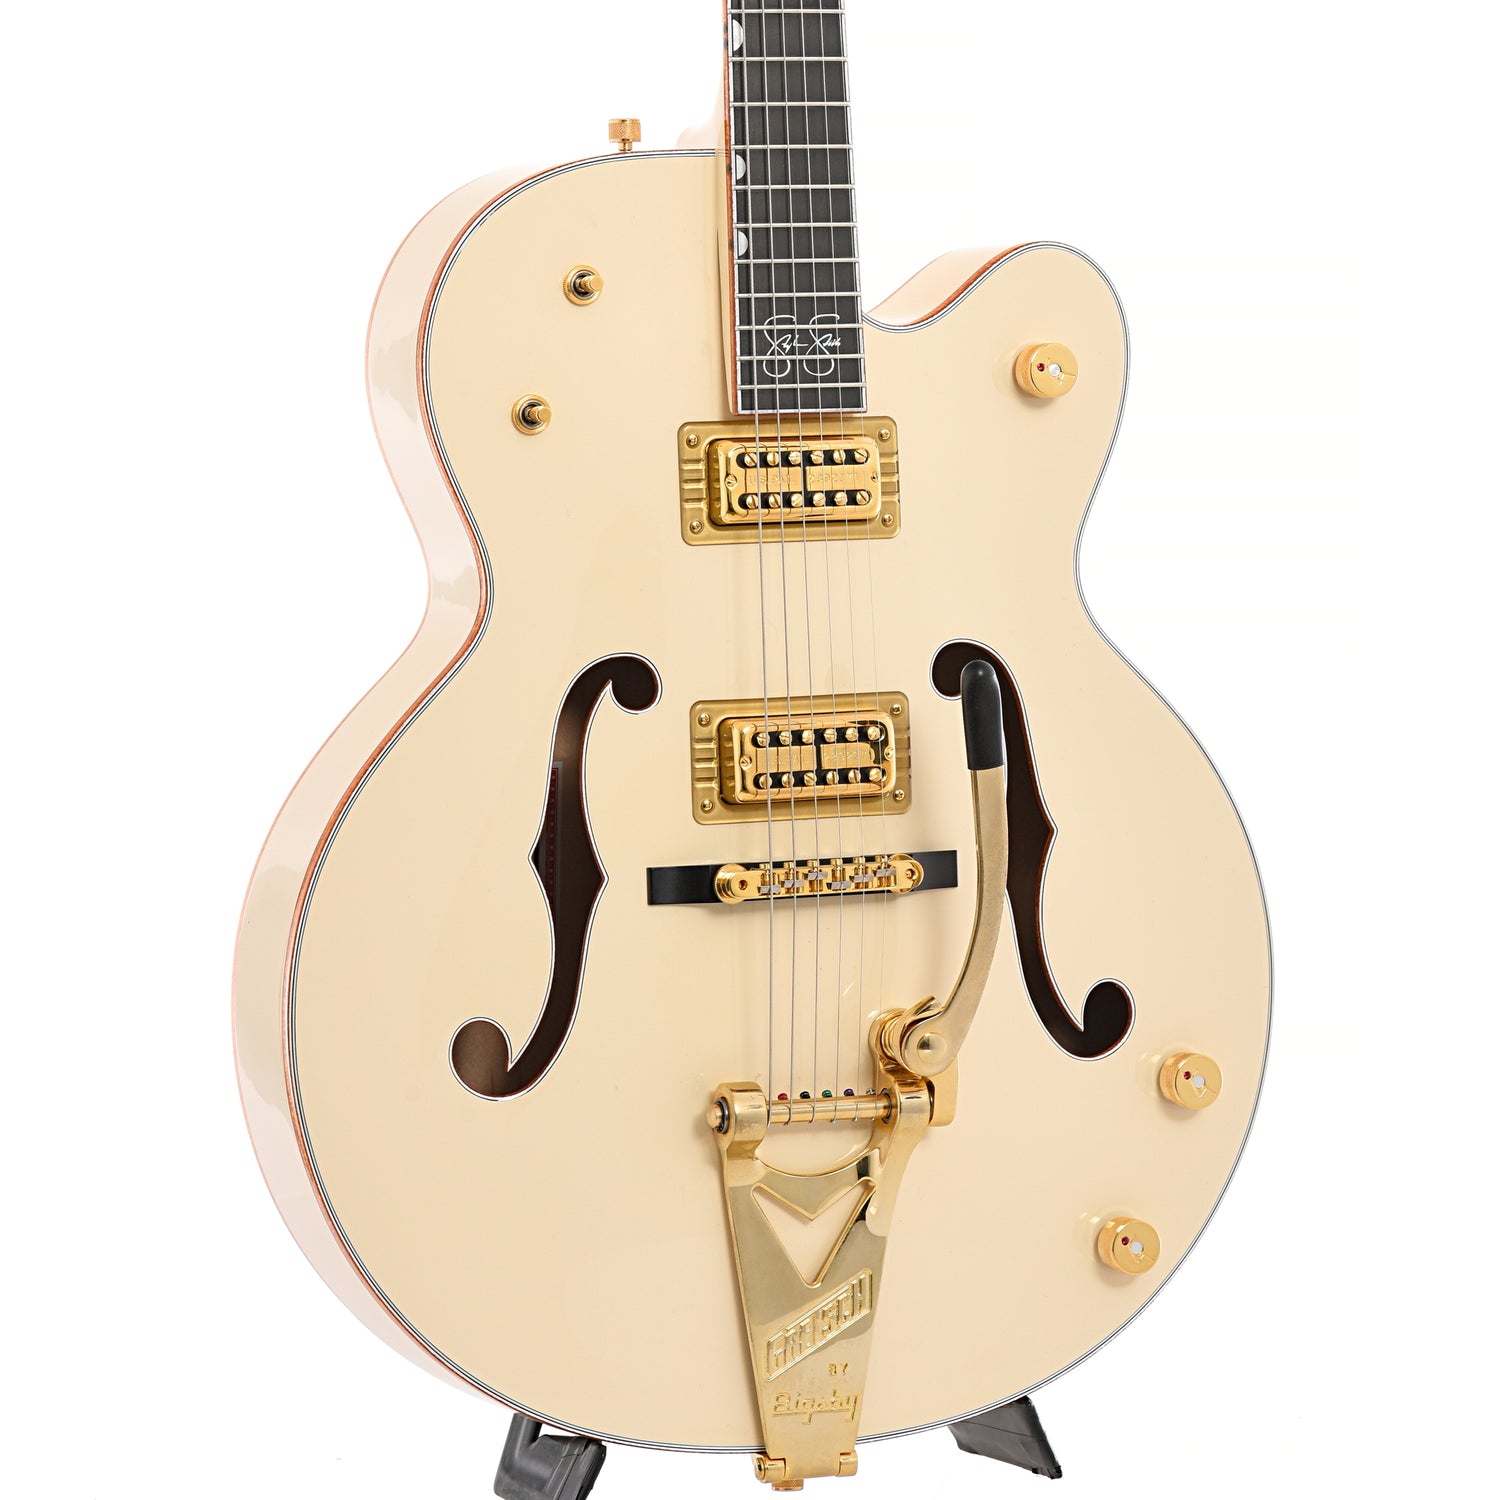 Front and side of Gretsch Stephen Stills White Falcon Hollow Body 